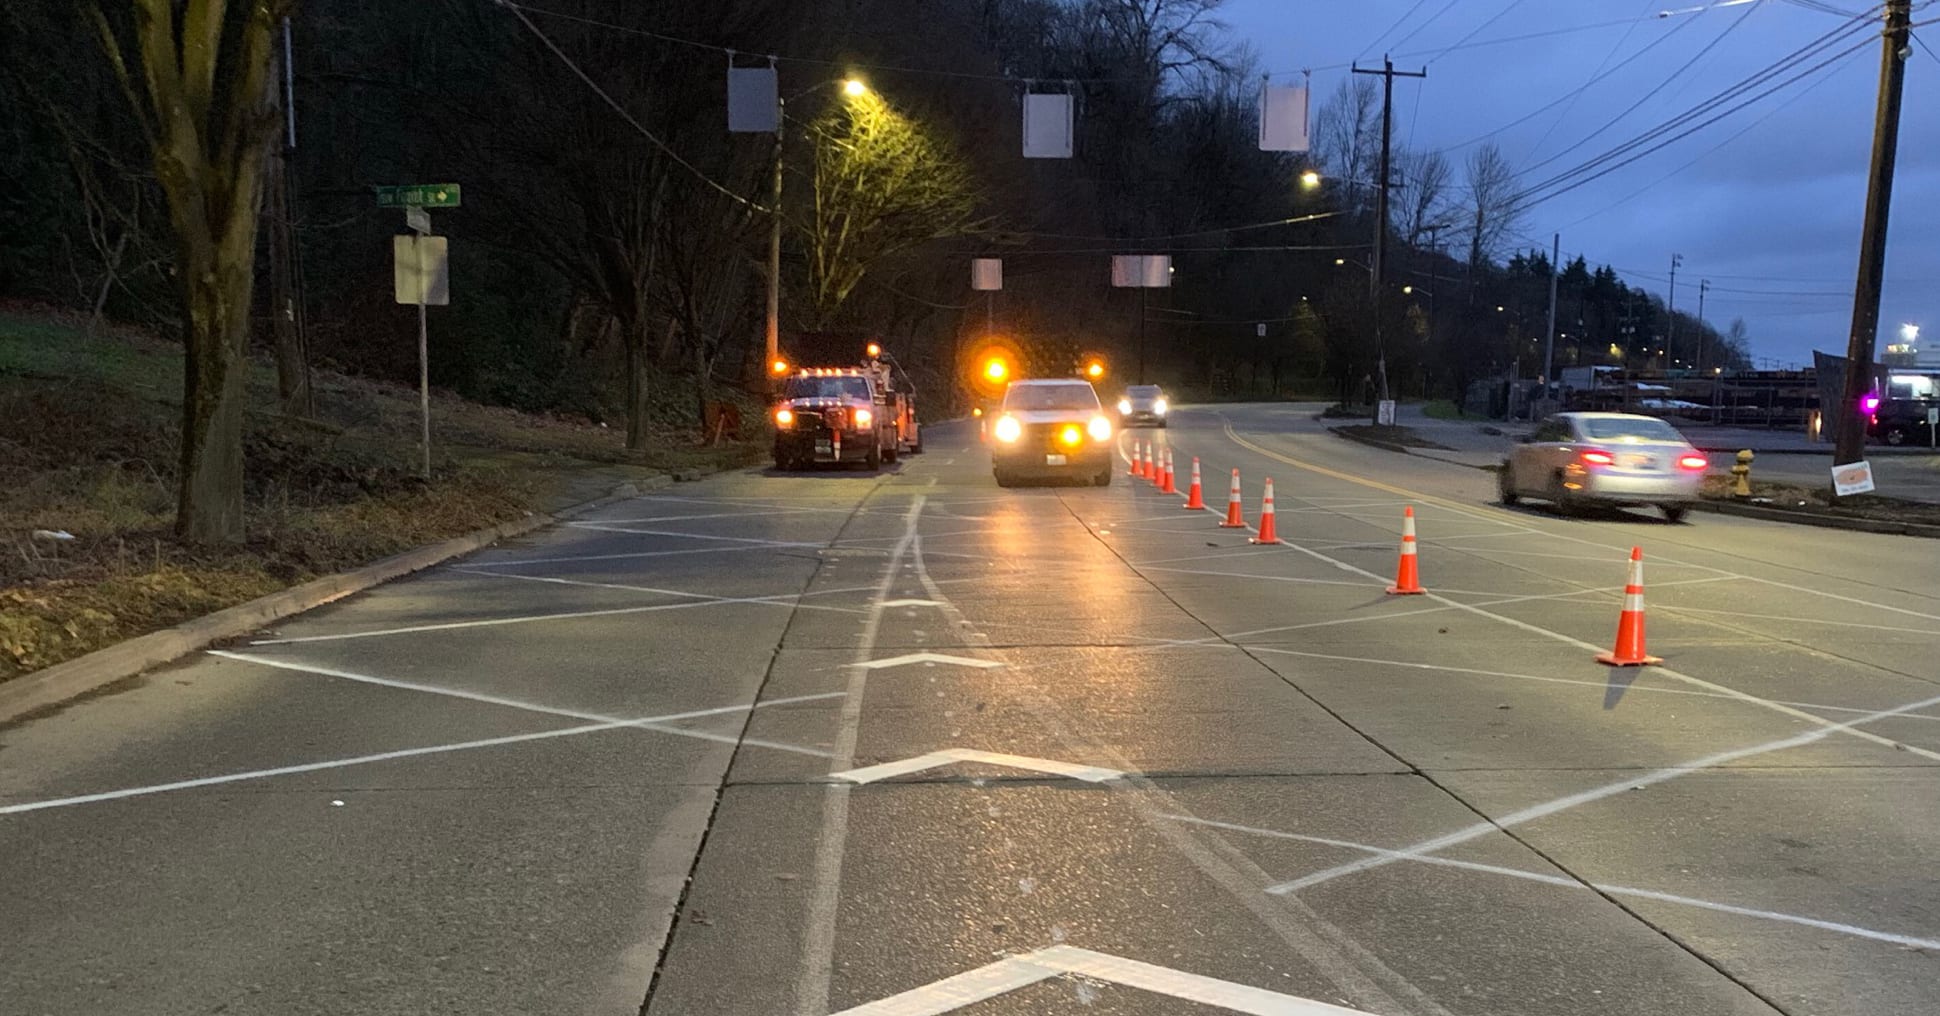 SDOT crews install cross hatchings (lane markings) near the intersection of West Marginal Way and Highland Park Way SW in West Seattle.